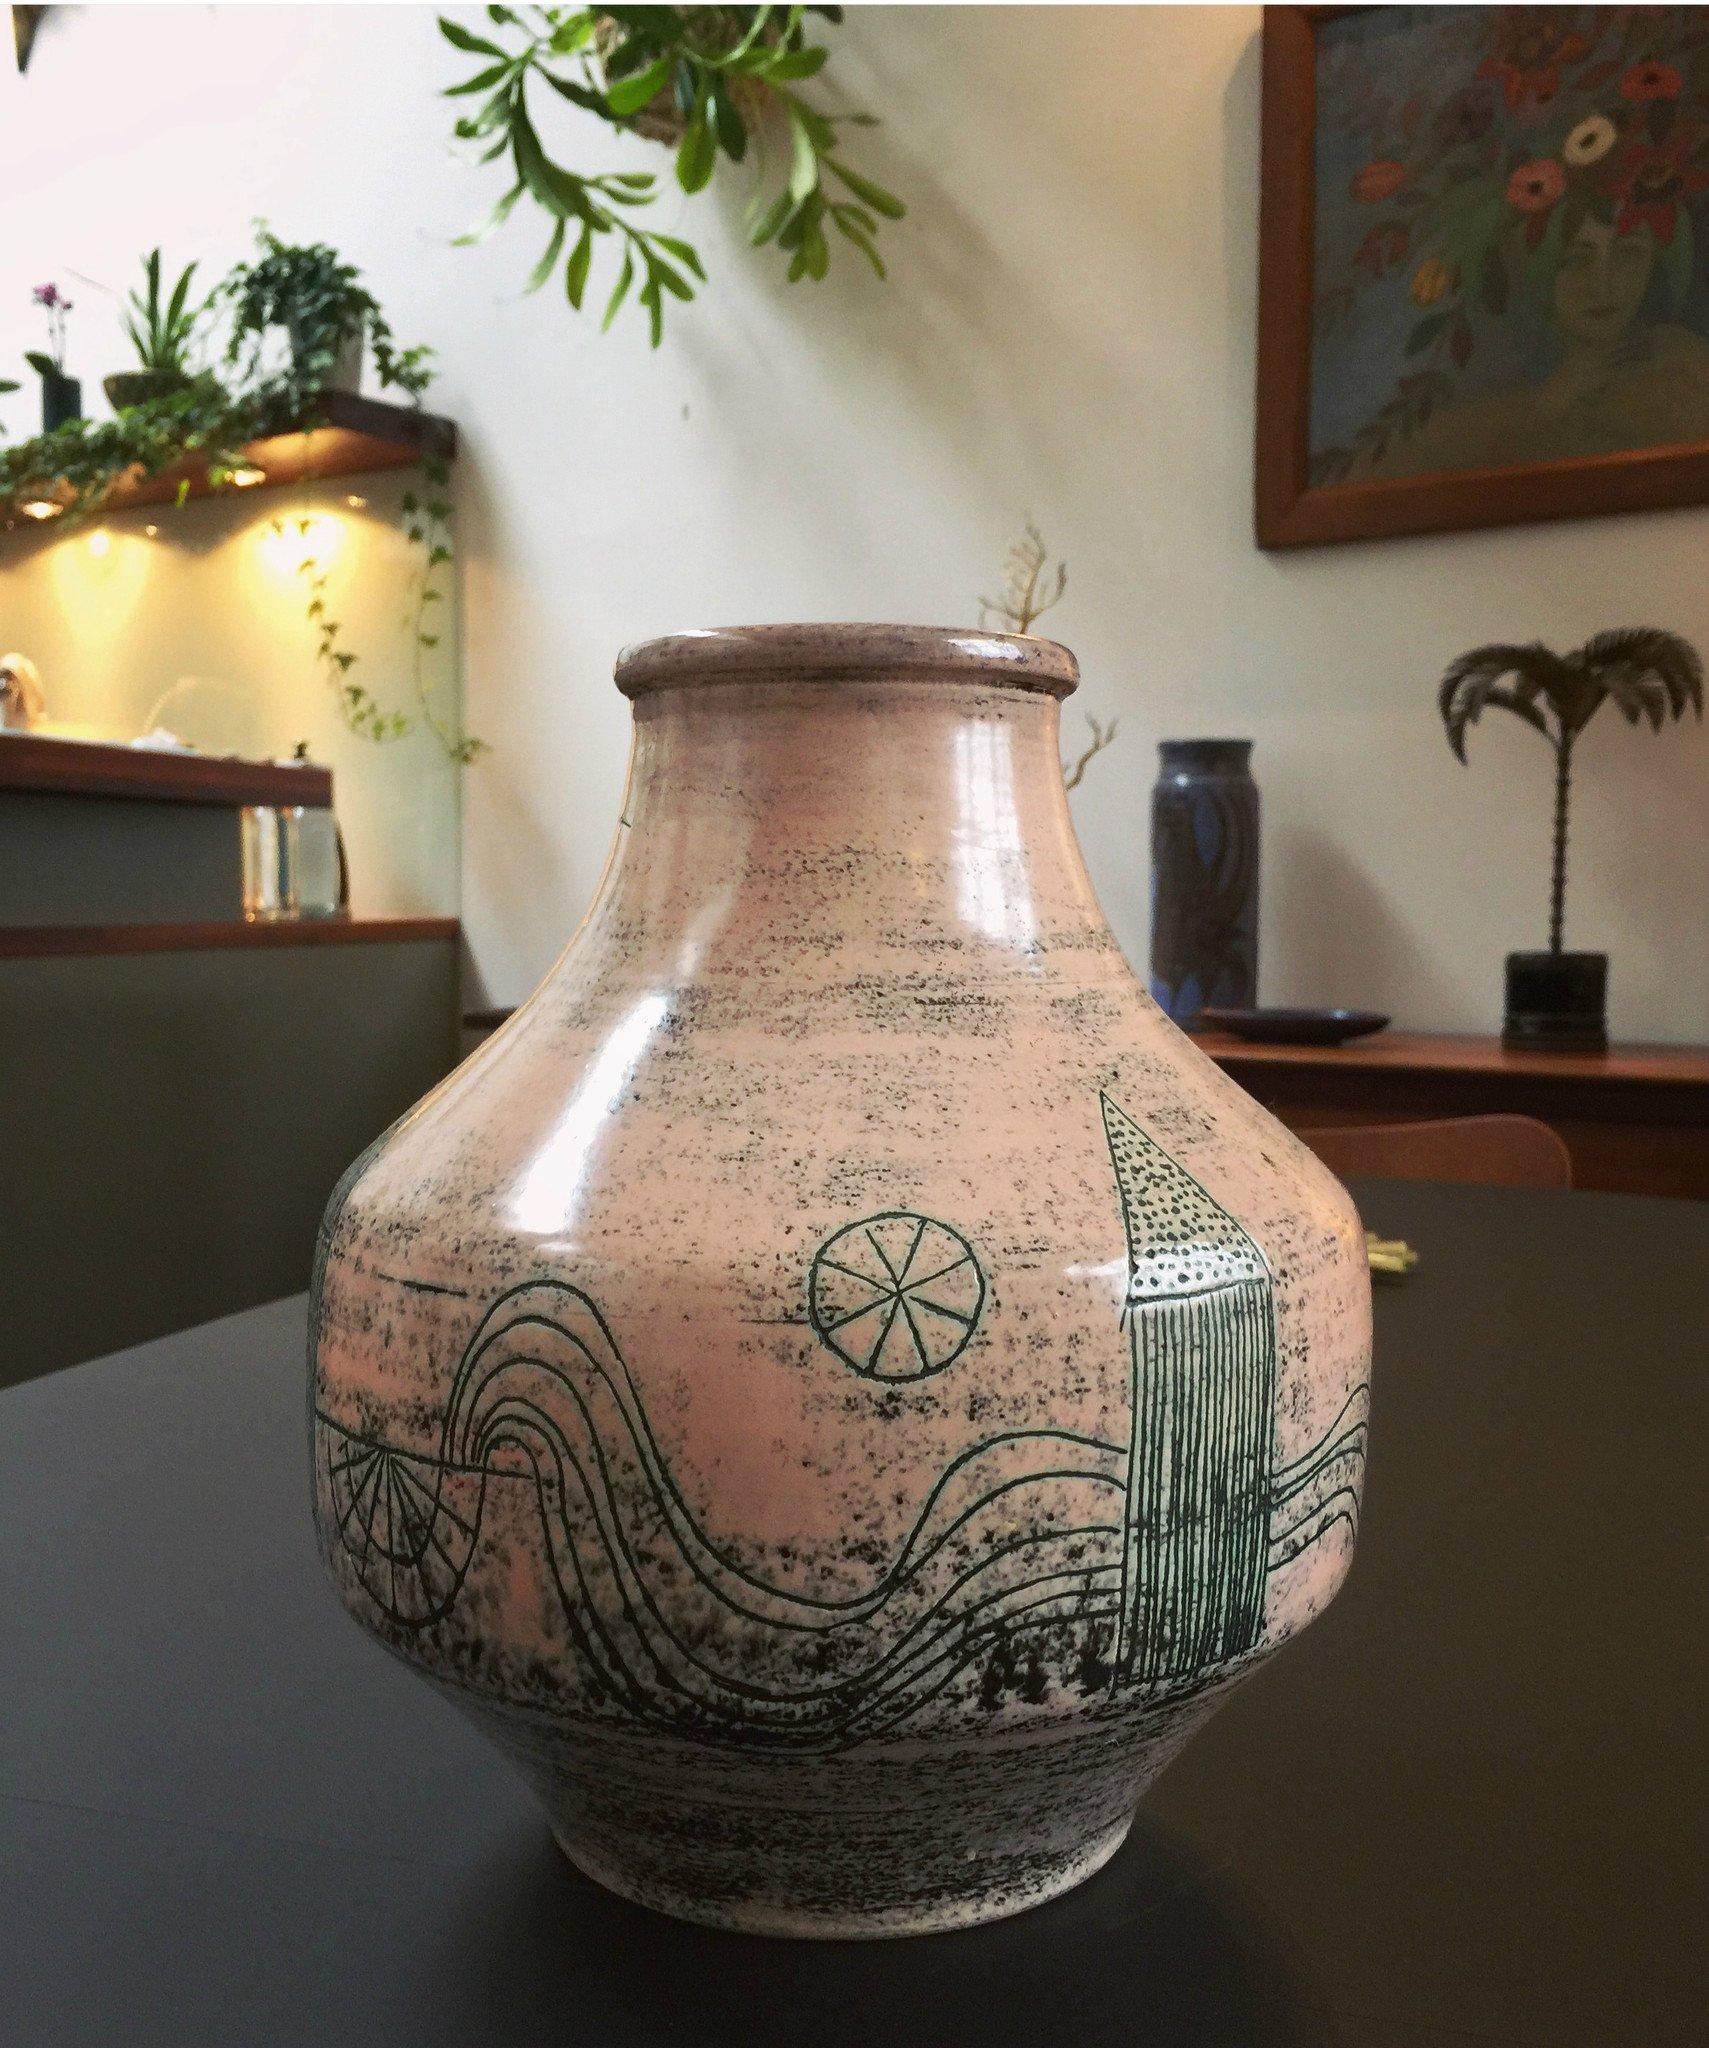 Ceramic vase (1978) by Jacques Blin (1920-1995), an engineer by trade but with a love for the visual arts and an immediately recognisable style. A way of working characterised by a more or less misty appearance of the glaze and by decoration deeply